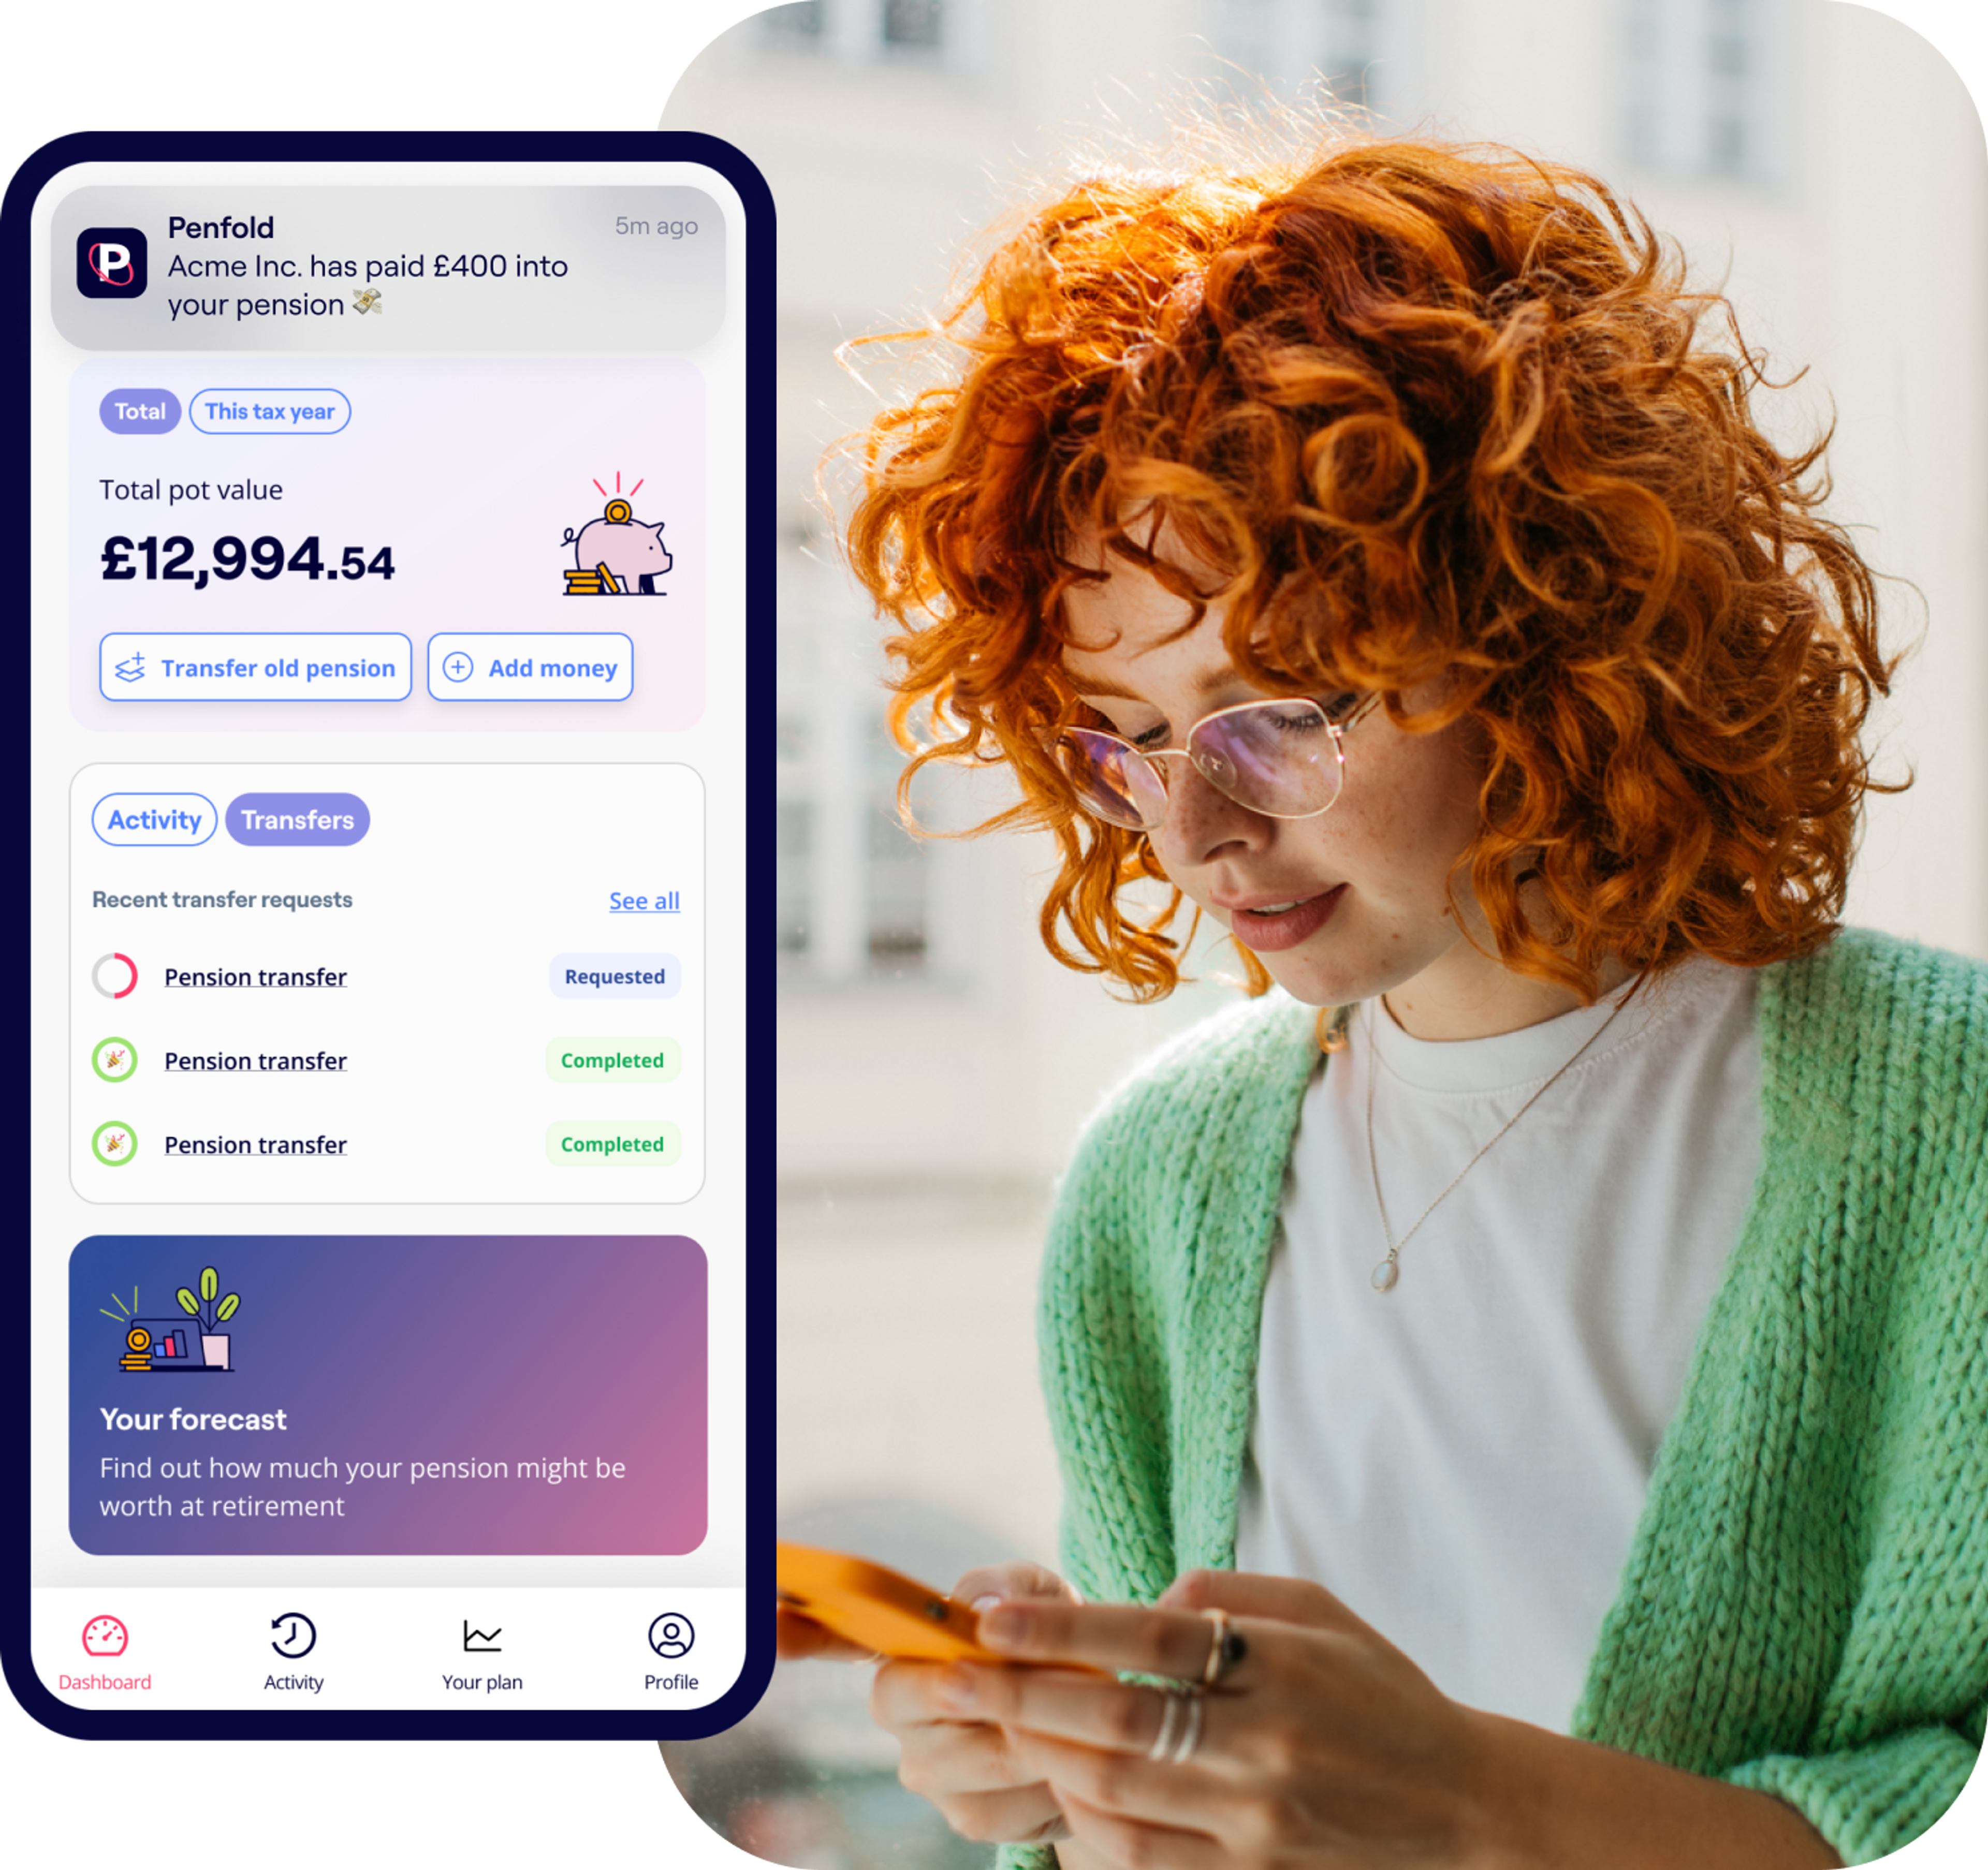 A young woman with curly red hair and glasses, wearing a mint green cardigan and white top, is looking at her mobile phone. Overlaid on the image are three mobile notifications from 'Penfold', detailing pension transactions and information. The first notification shows a payment of £400 from Acme Inc. into the pension. The second displays a total pension pot value of £12,994.54 with options to transfer old pensions or add money. The third offers a pension forecast service.